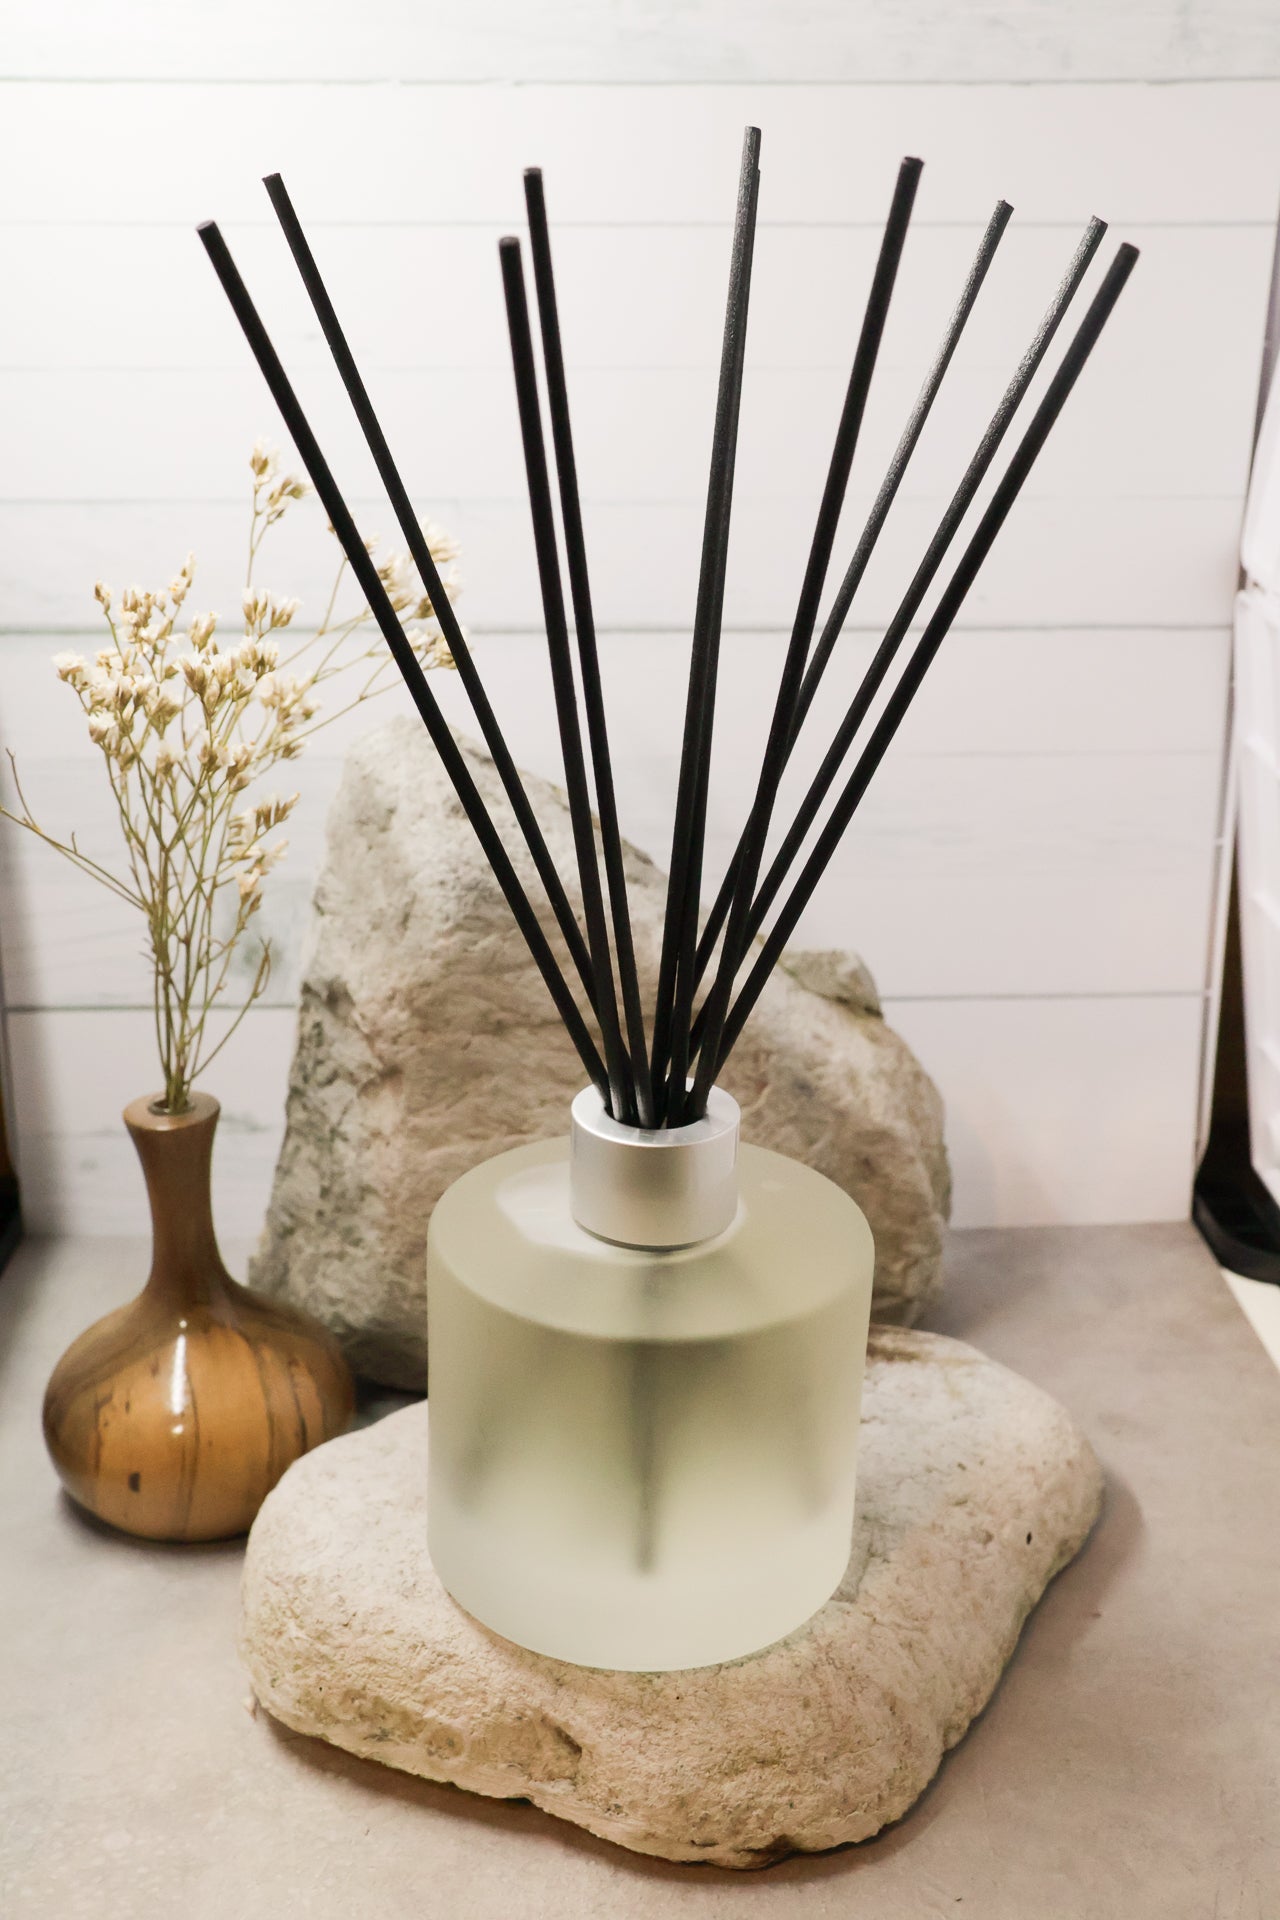 Crystal infused diffuser with wicks with the fragrance Kaffir Lime and Lemongrass